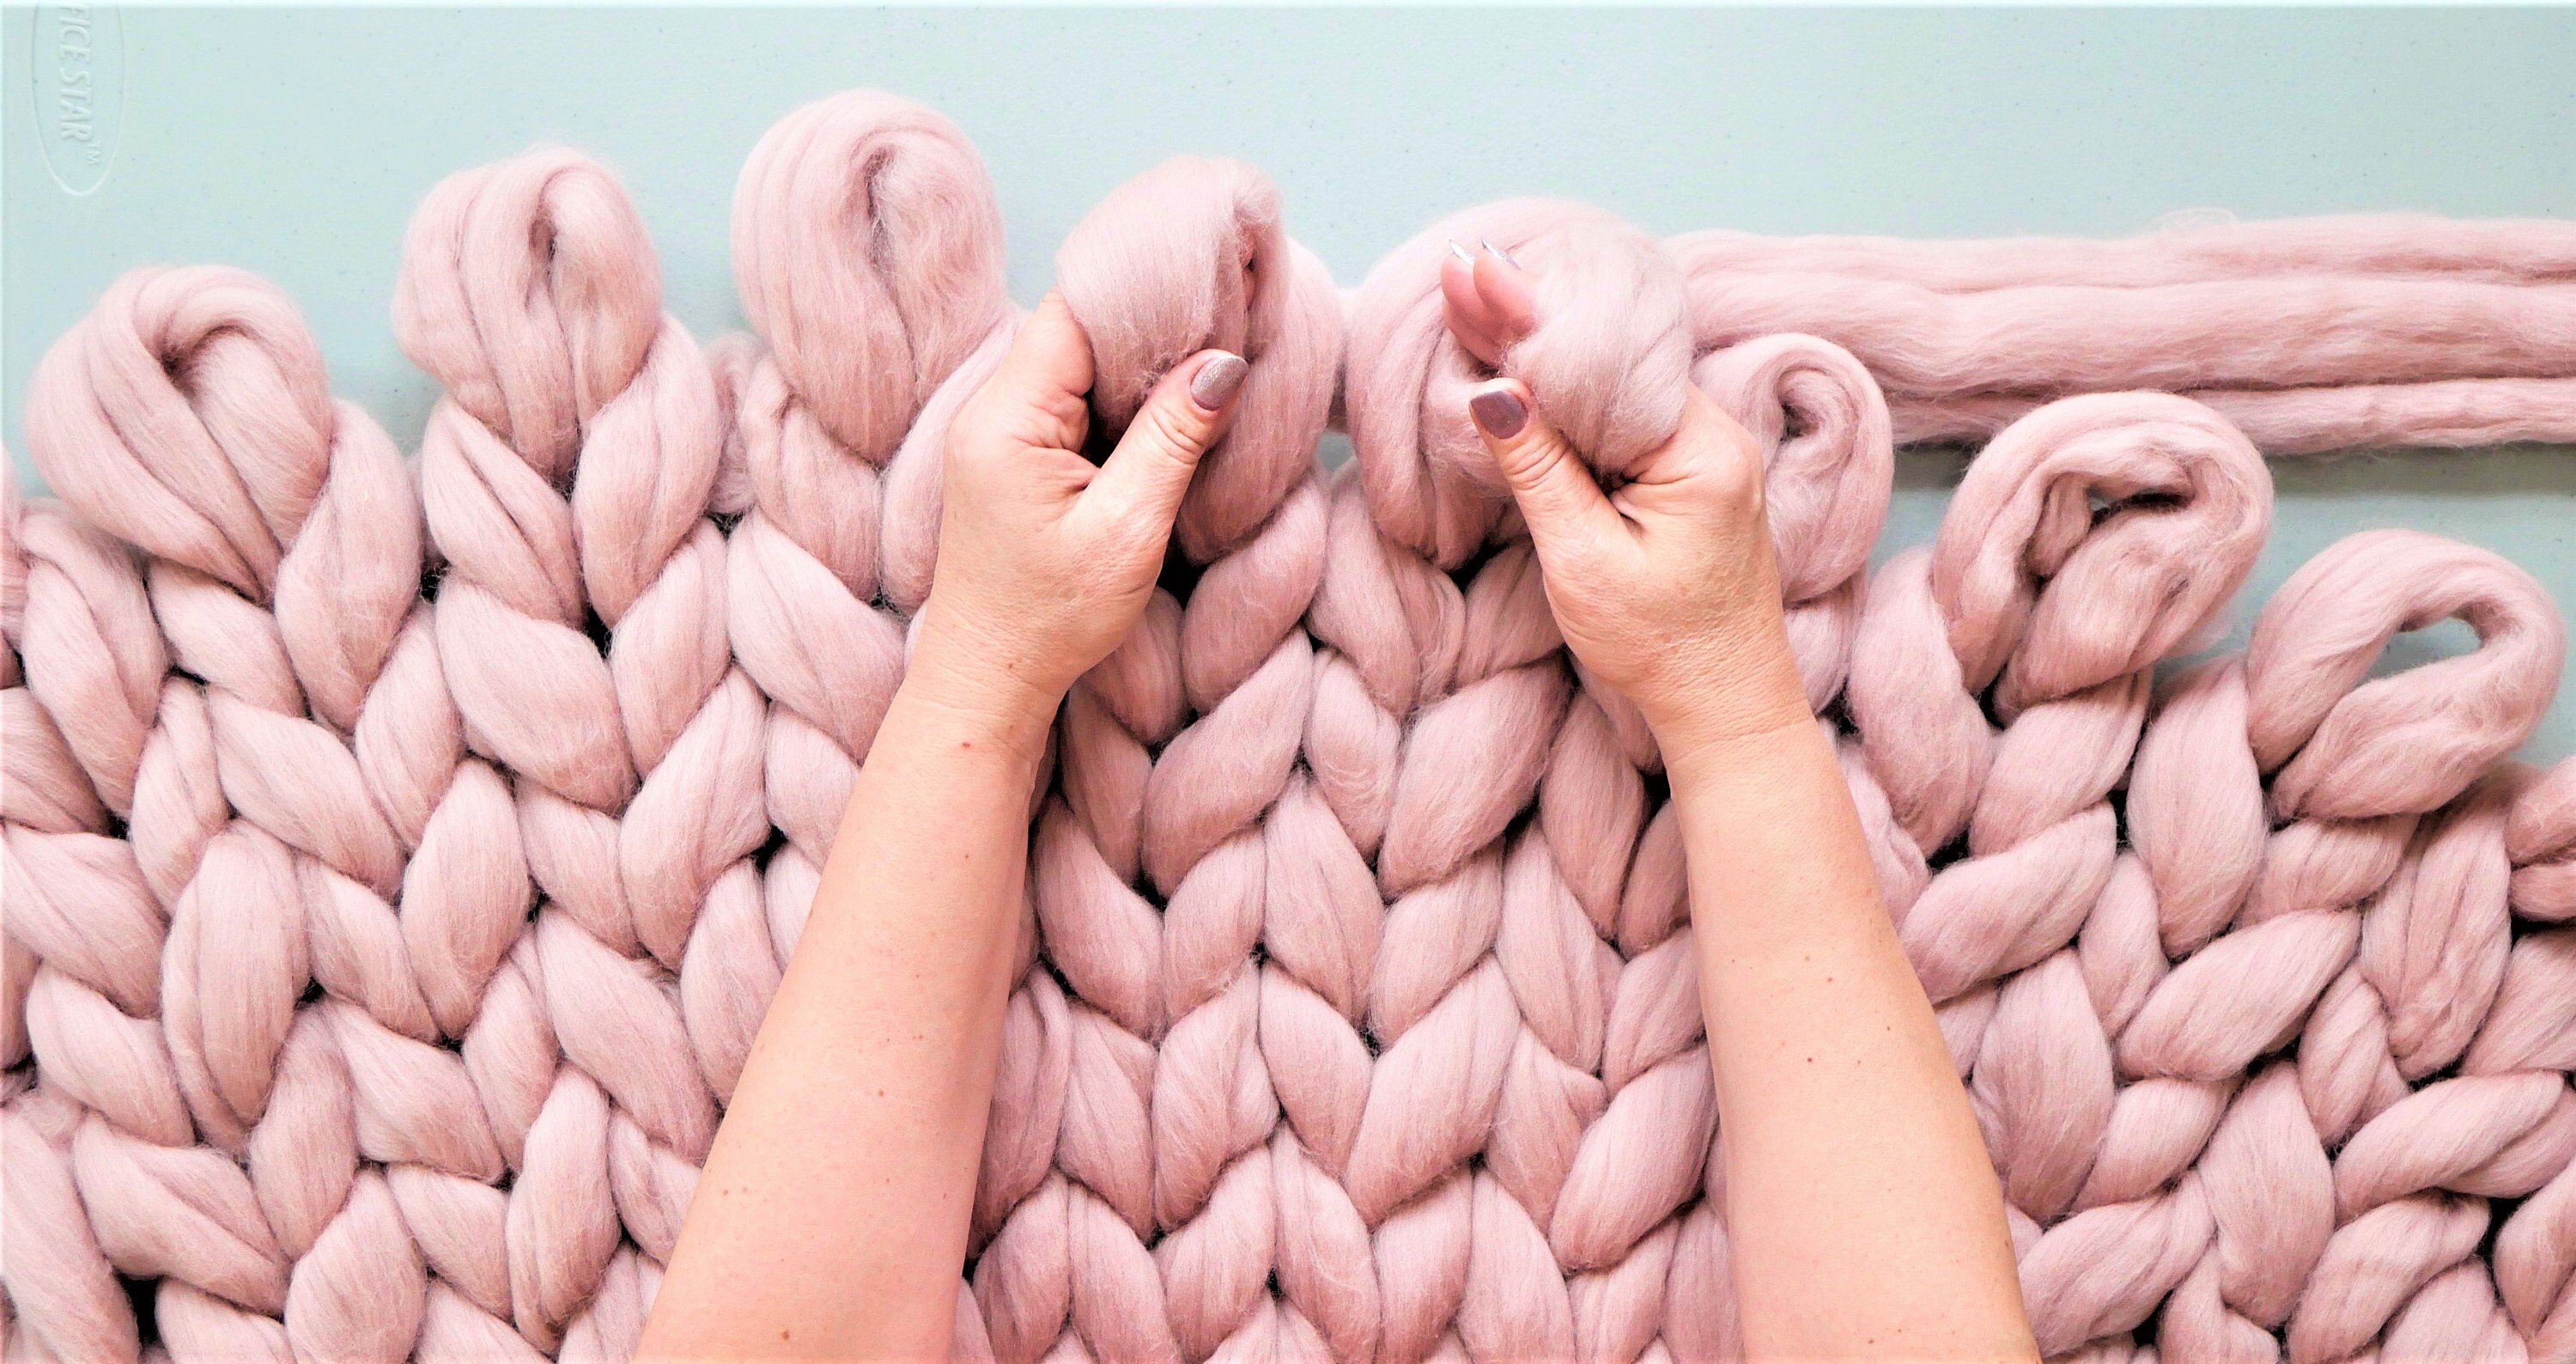 Craft Kit Chunky Yarn Learn Arm Knitting With Our Blanket DIY Kit Including  Video Tutorial Choice of 14 Tube Yarn Colours 